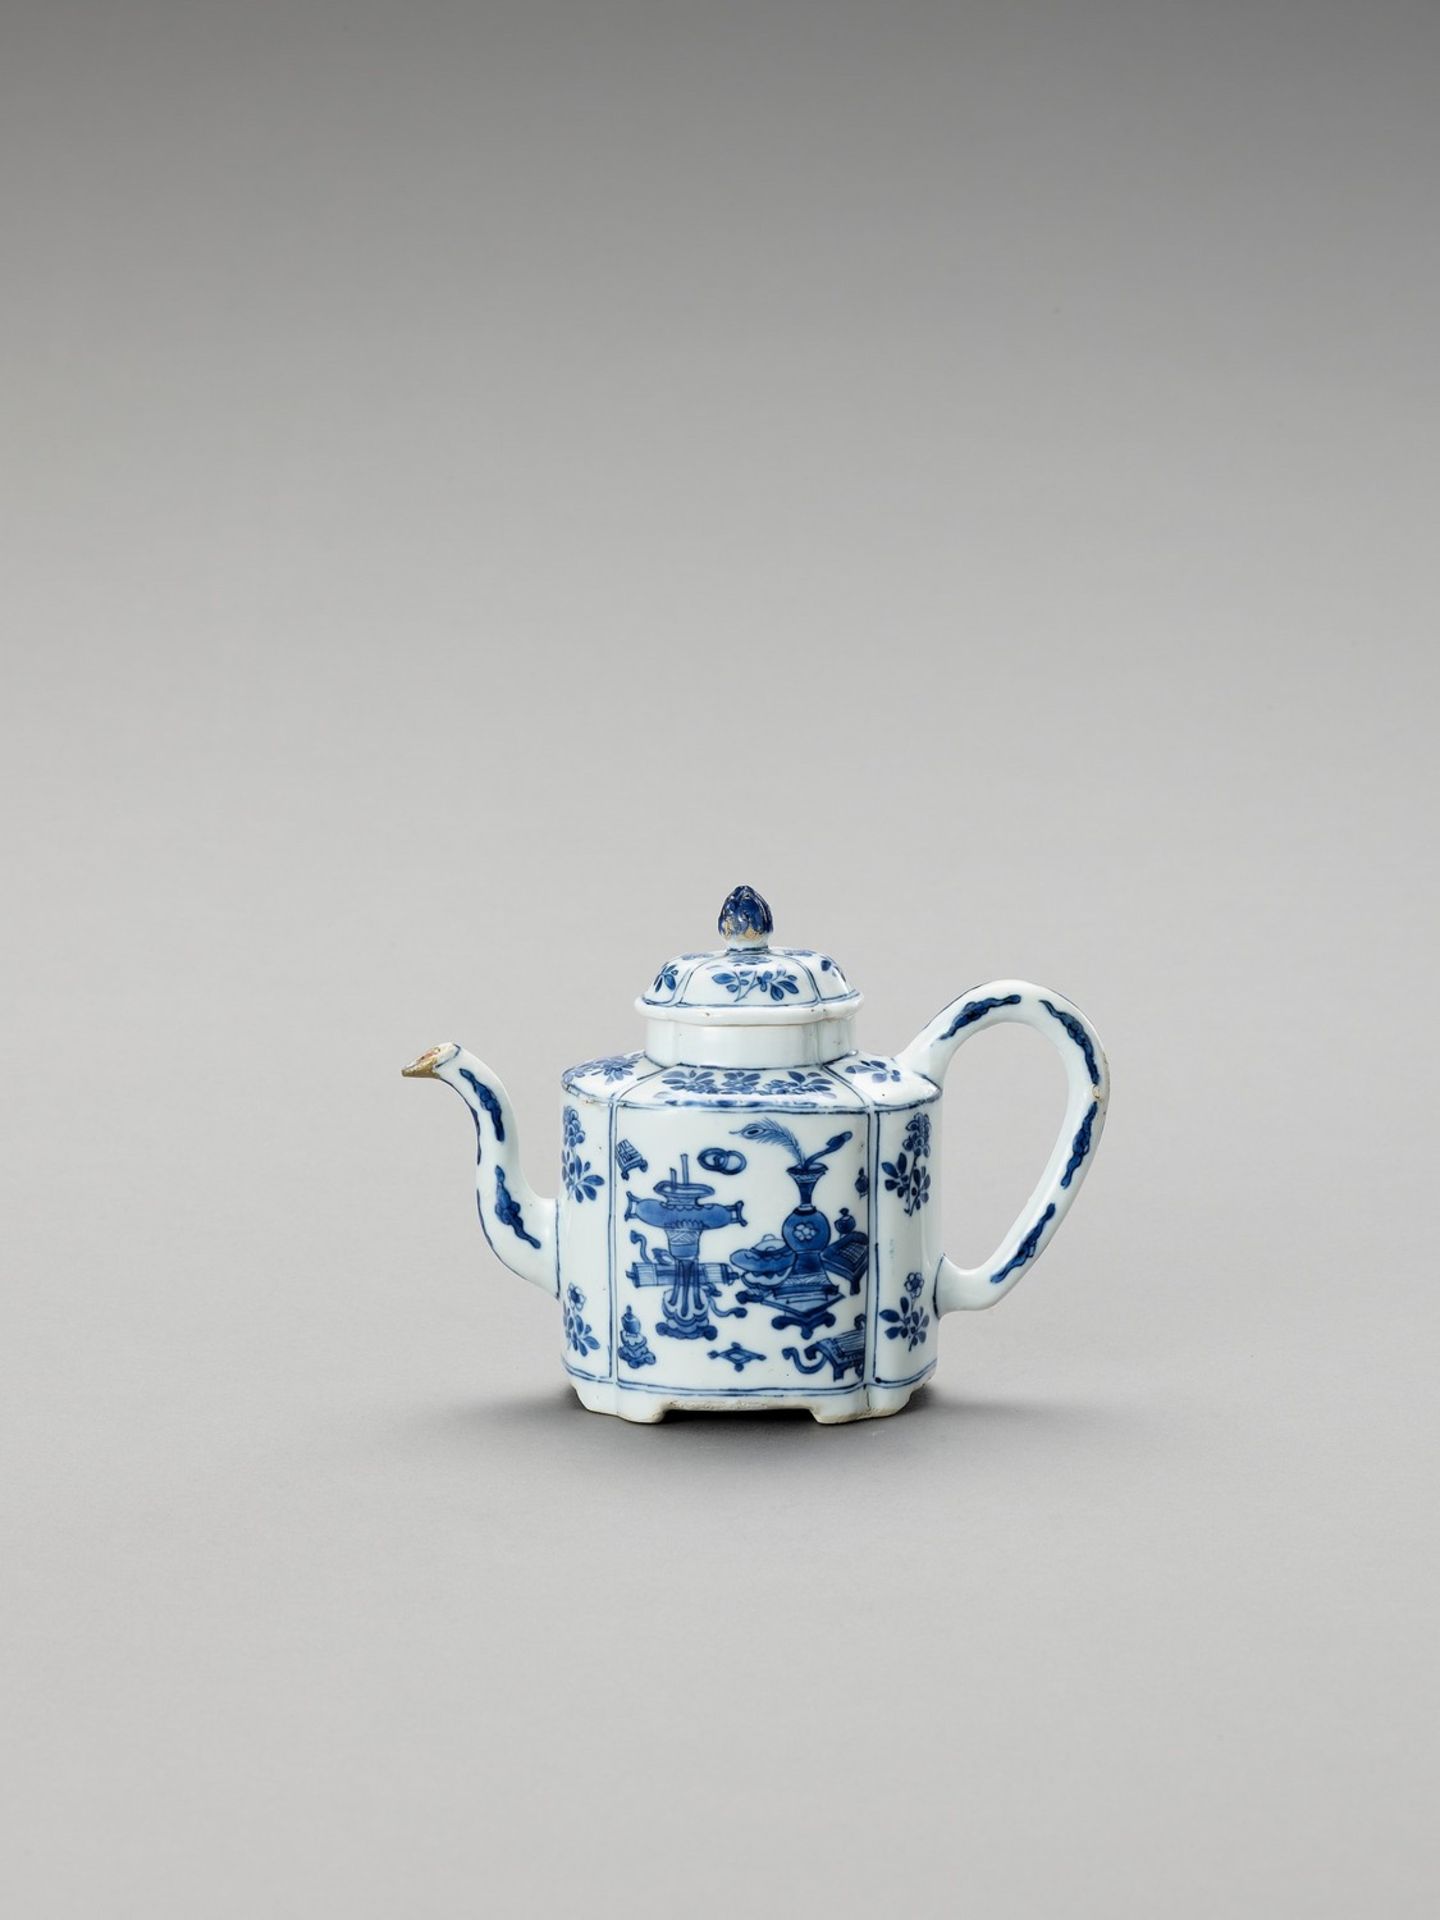 A LOBED BLUE AND WHITE PORCELAIN TEAPOT - Image 3 of 6